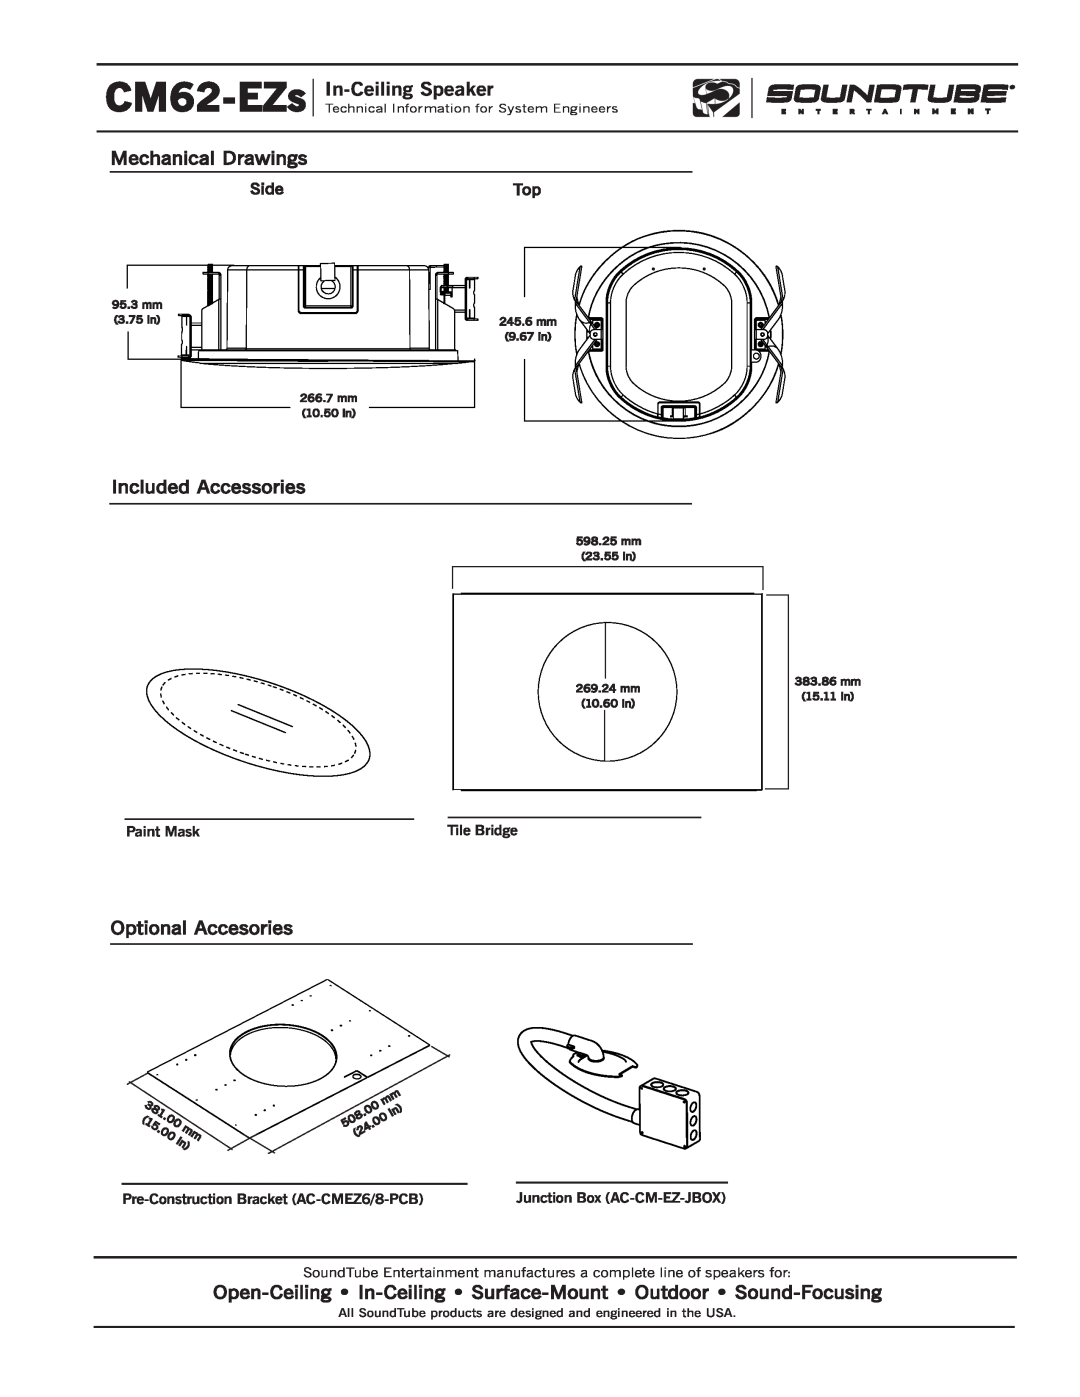 Phase Technology Mechanical Drawings, Included Accessories, Optional Accesories, CM62-EZs, In-CeilingSpeaker 